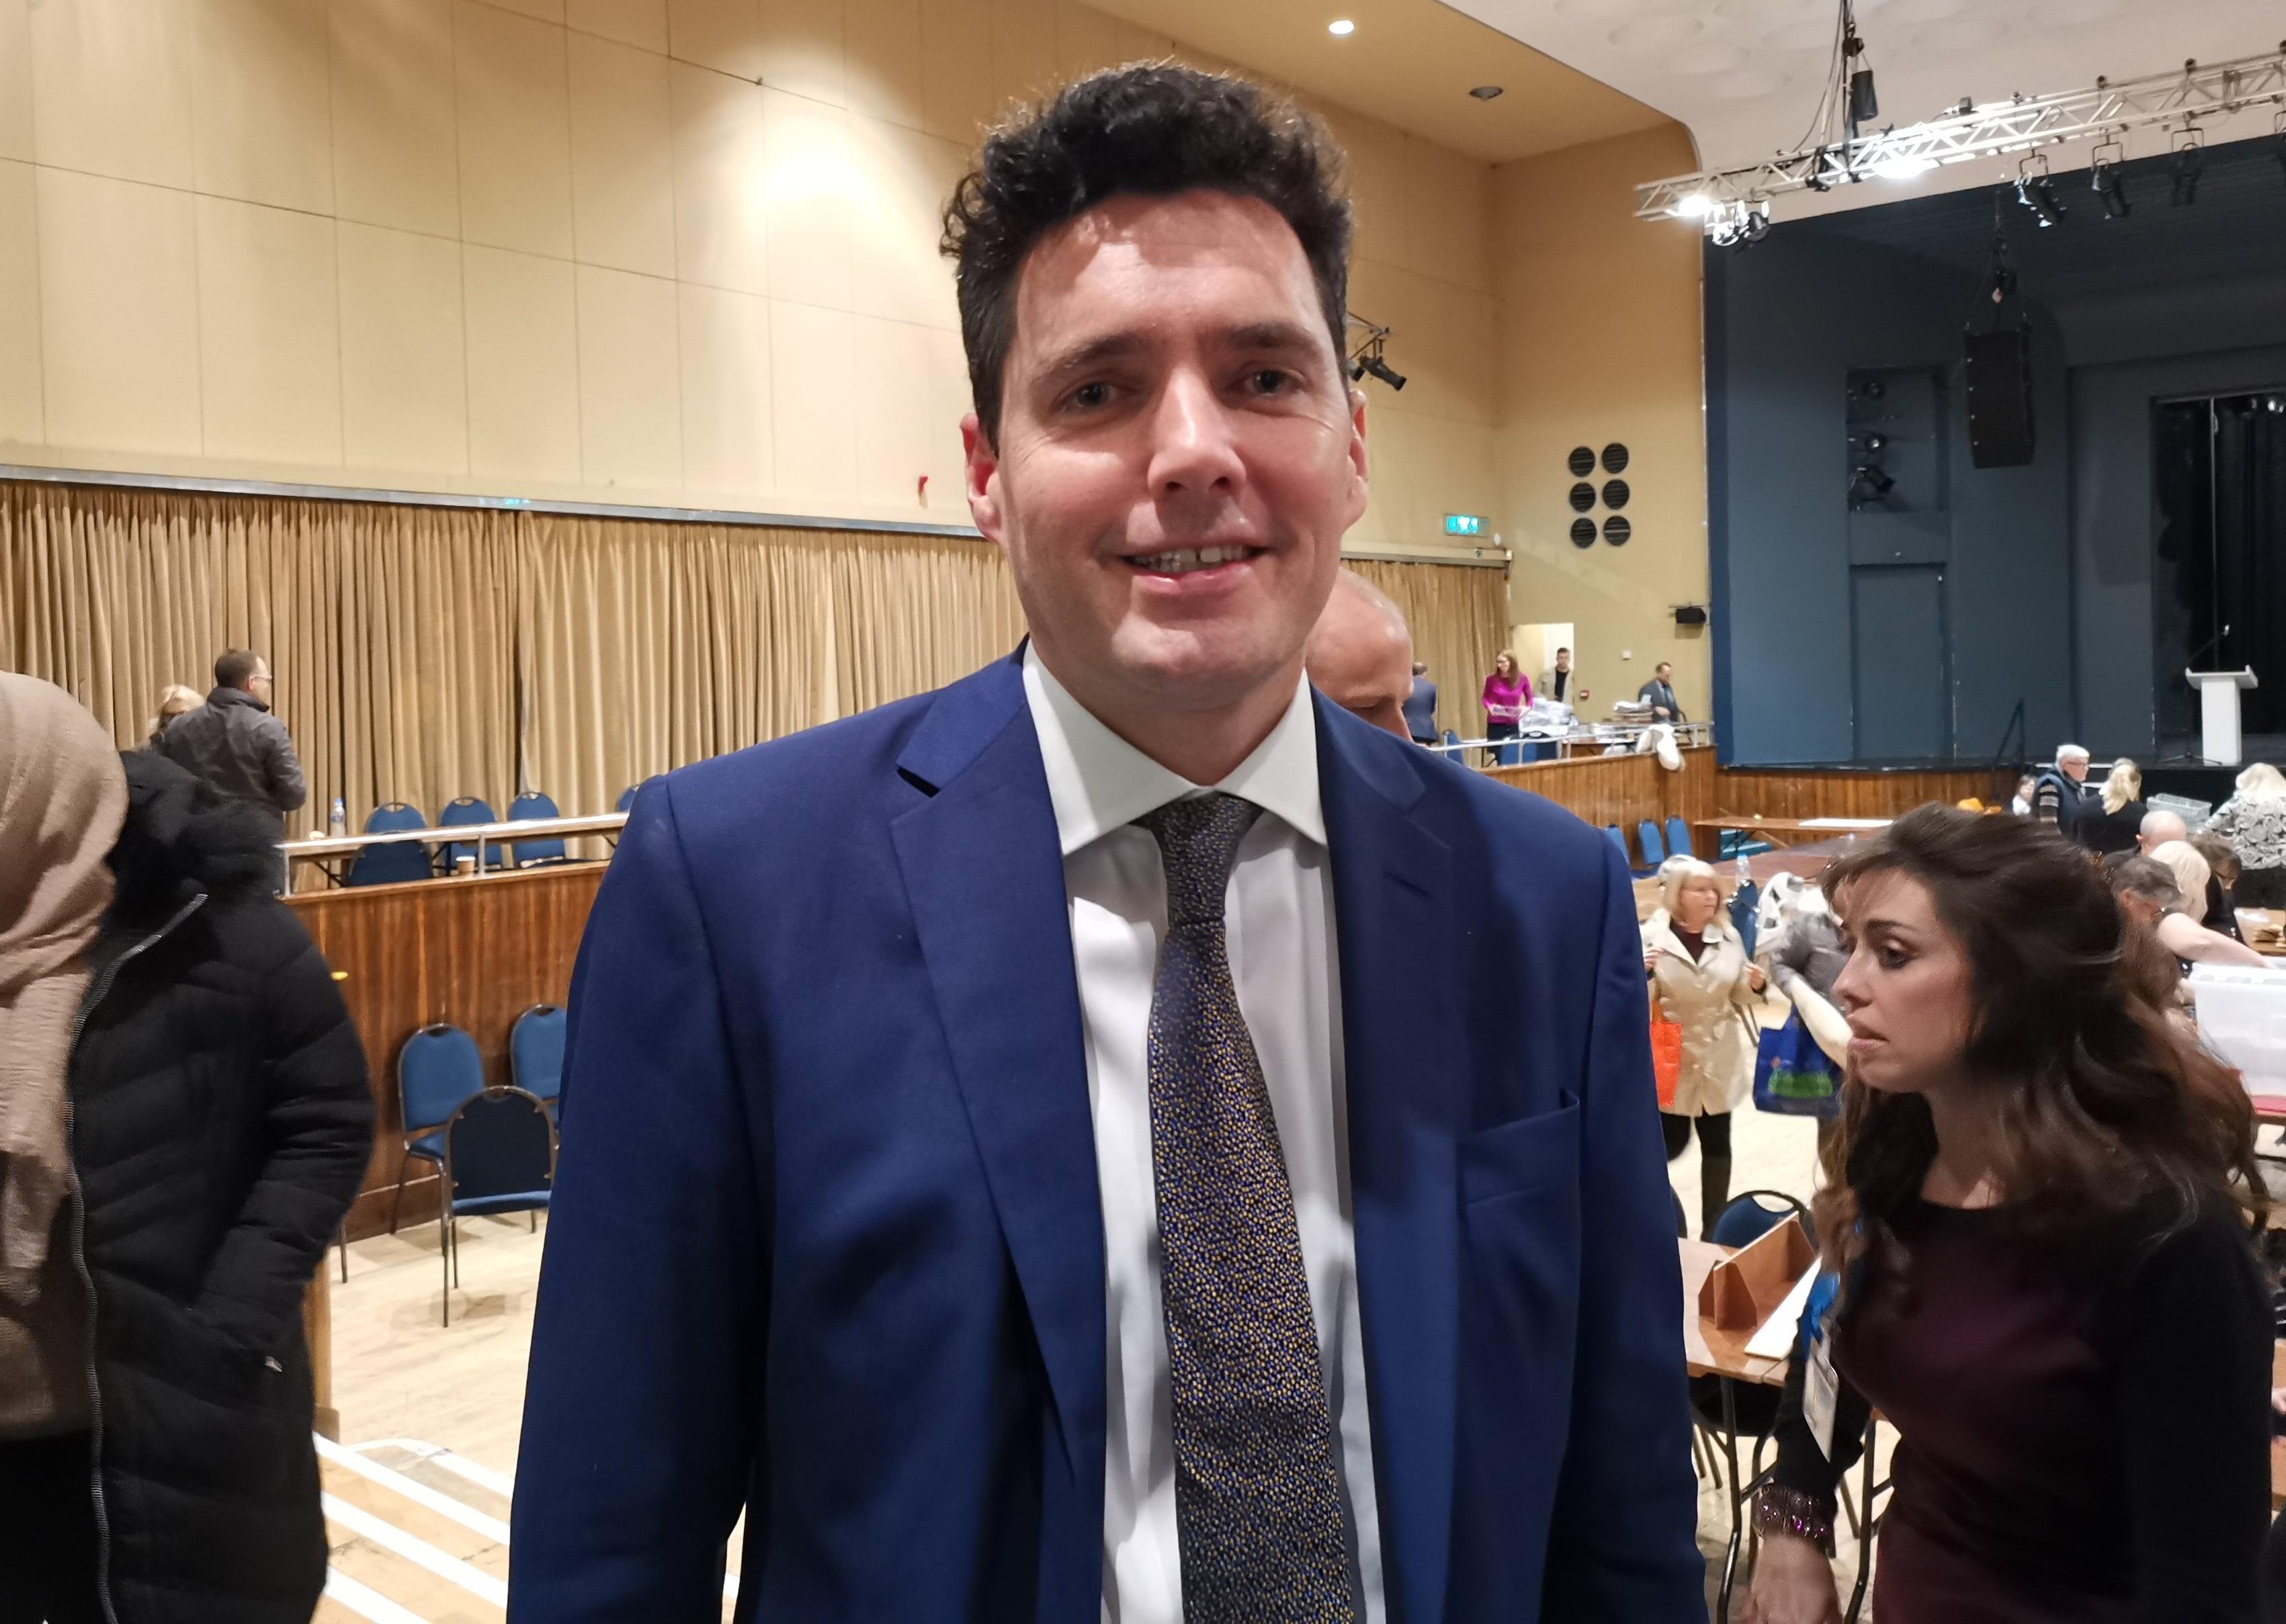 Huw Merriman is still Conservative MP for Bexhill and Battle